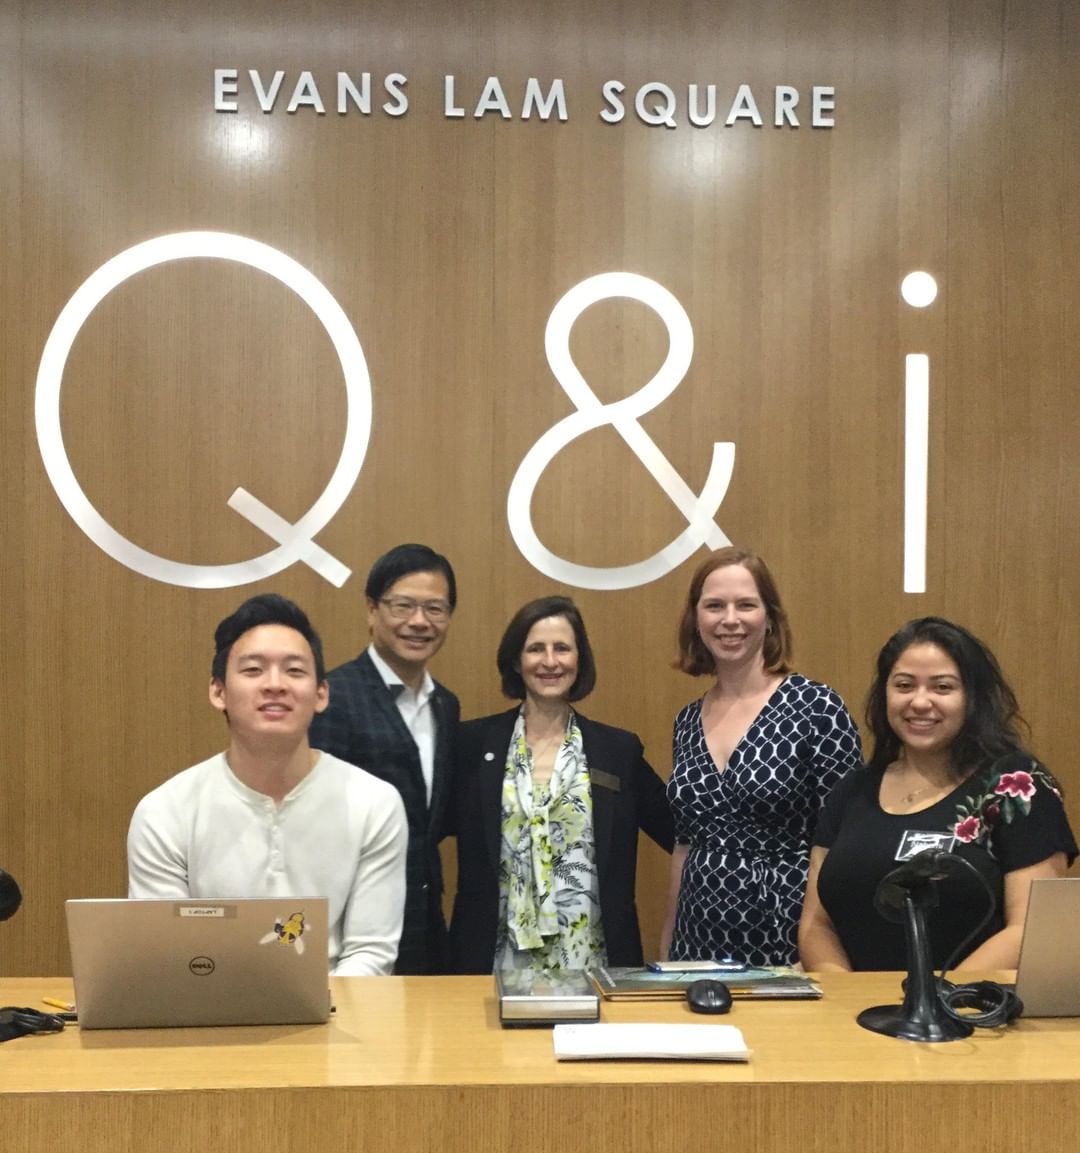 Q&i desk with Evans Lam, Mary Ann Mavrinac and other staff